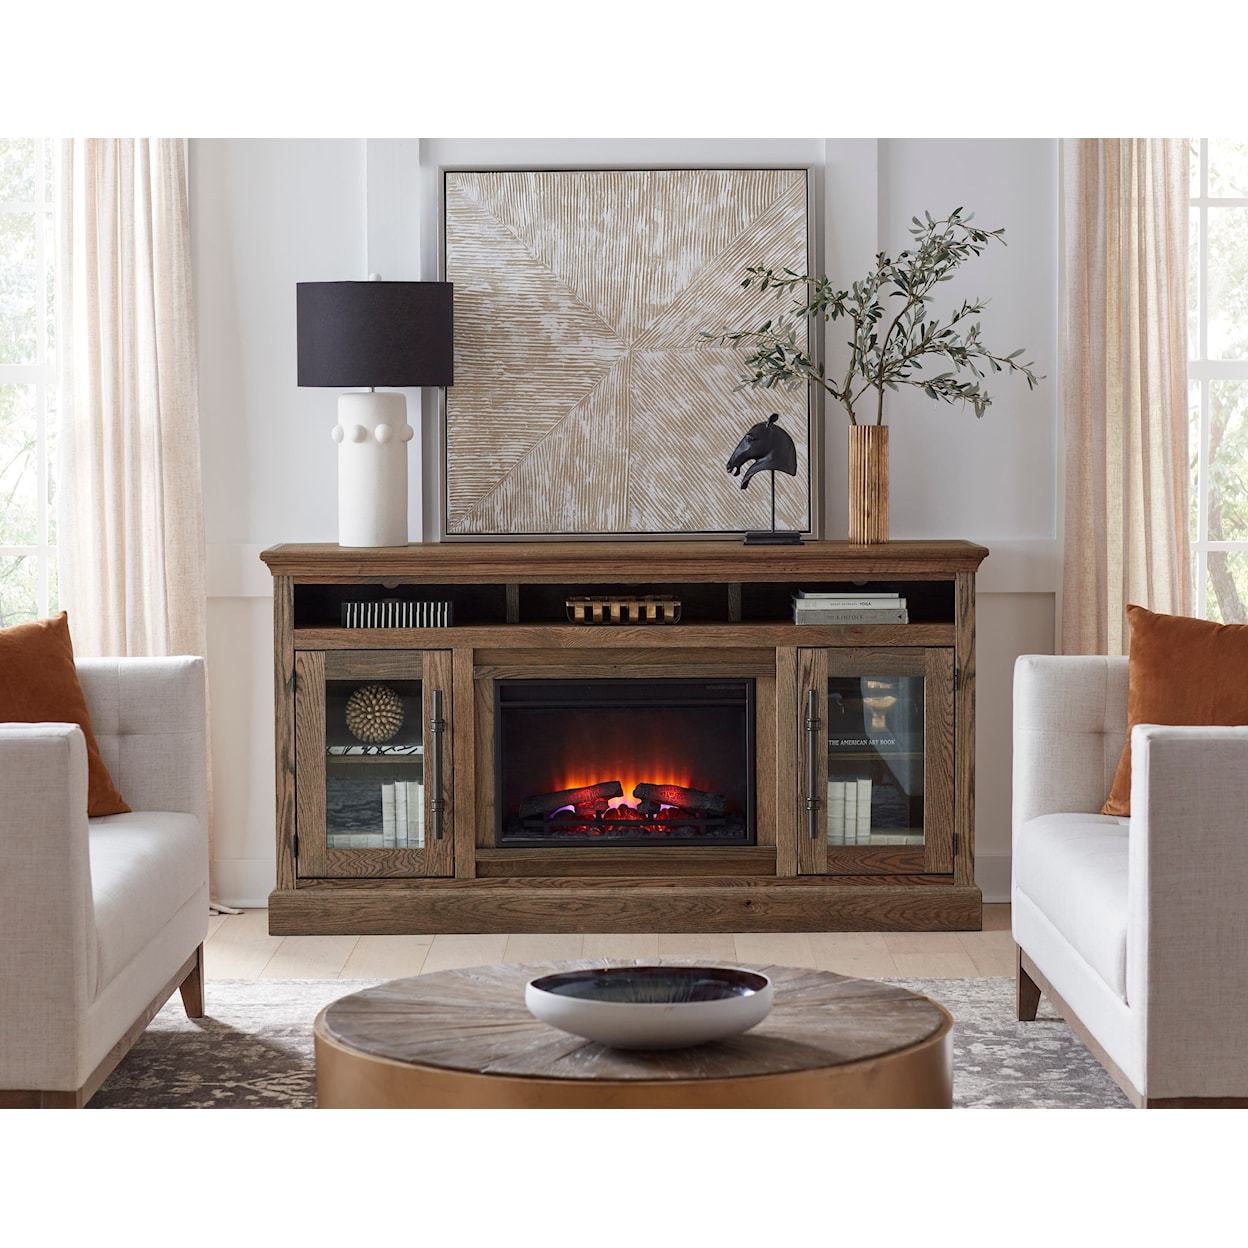 Aspenhome Manchester 73" Fireplace Console with Glass Doors